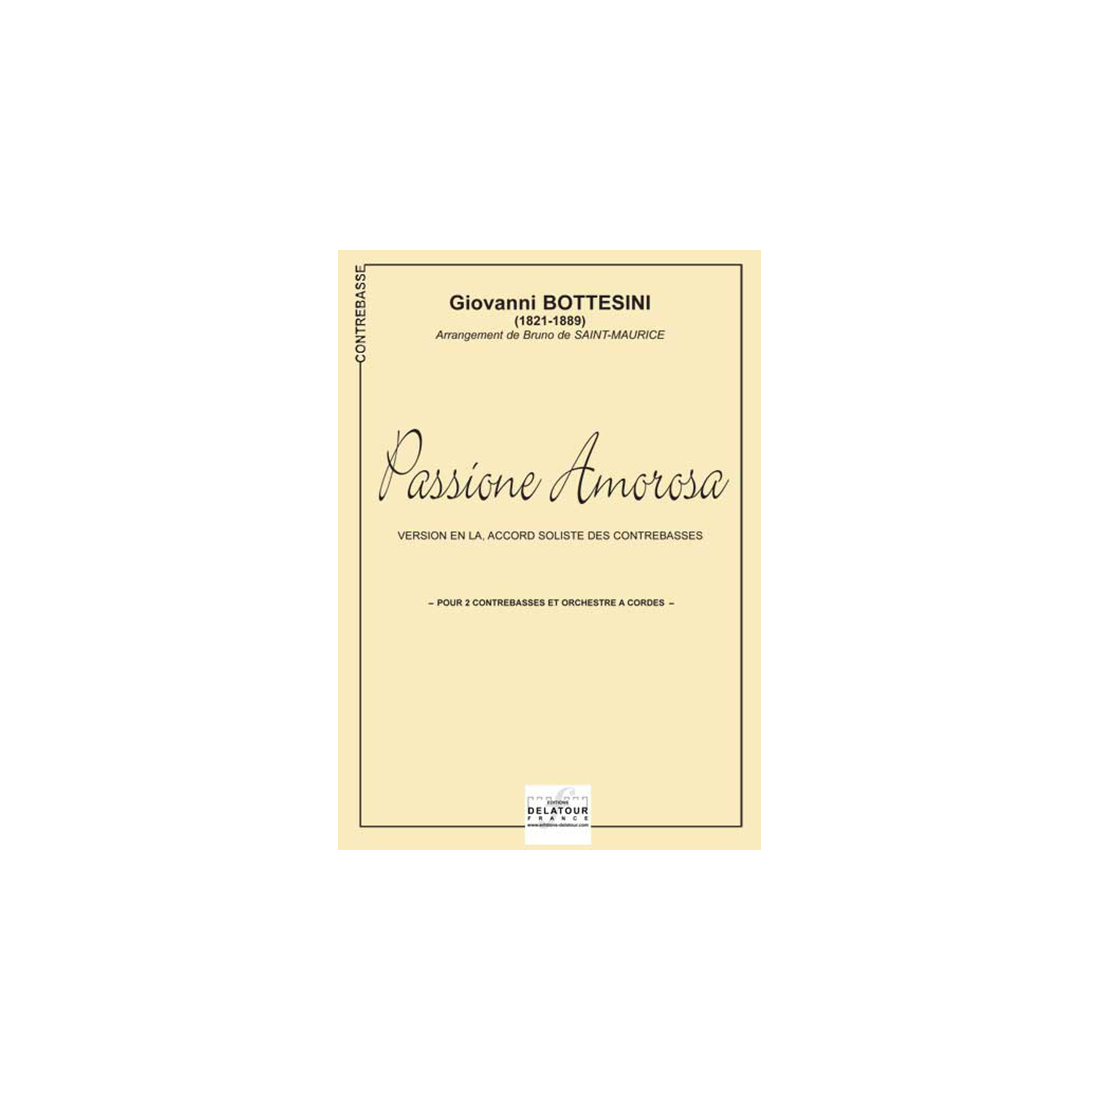 Passione amorosa for 2 double basses (A version)